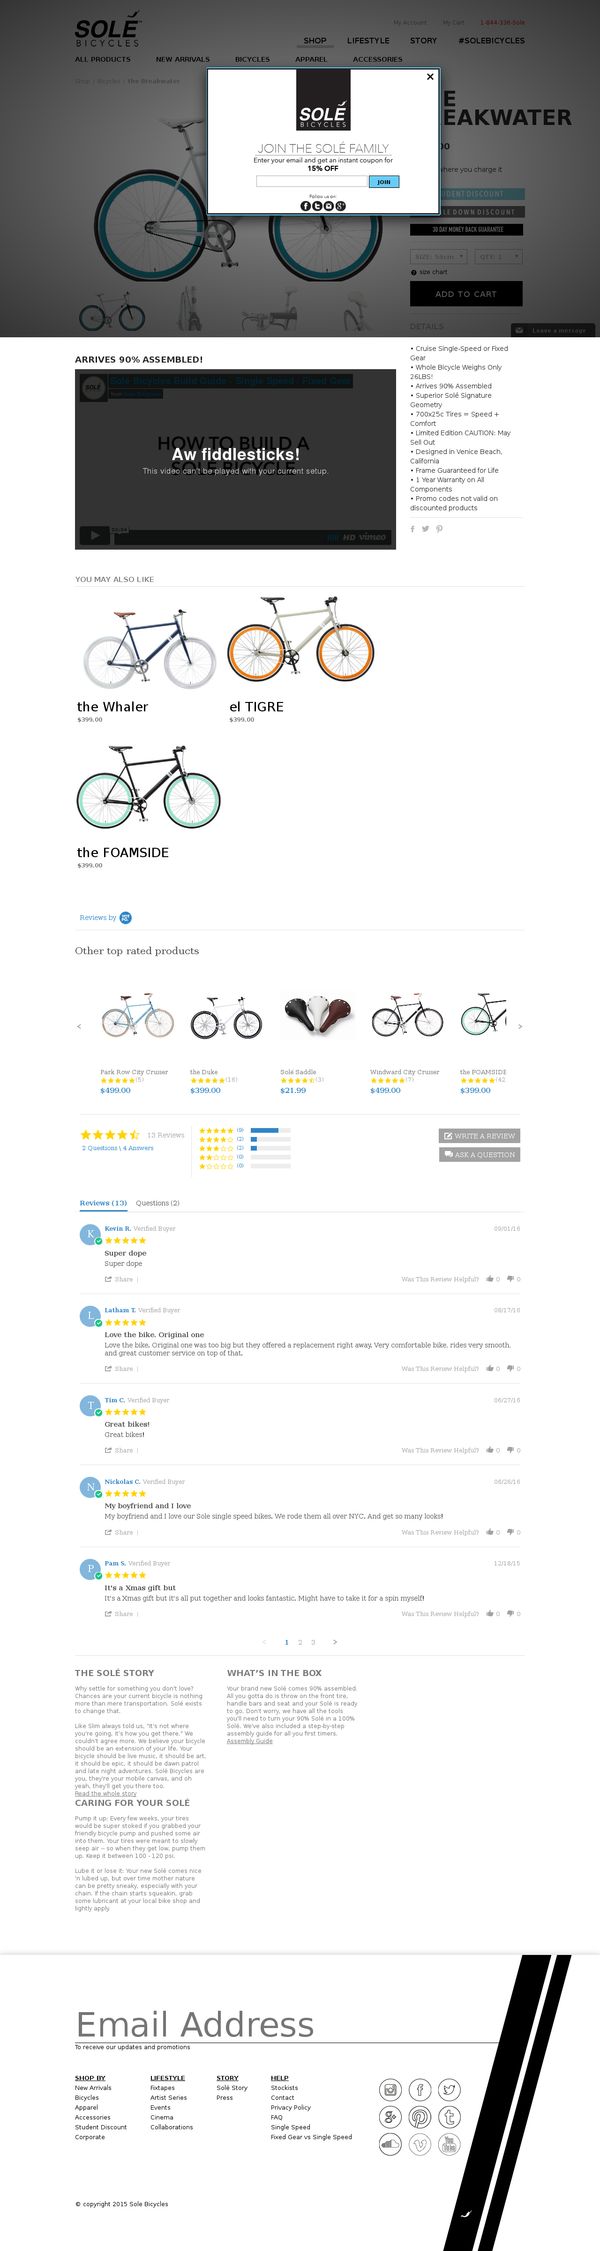 Solé Bicycles — the Breakwater - $379 Fixed Gear &amp; Single Speed bike for Sale by Solé Bicyc…